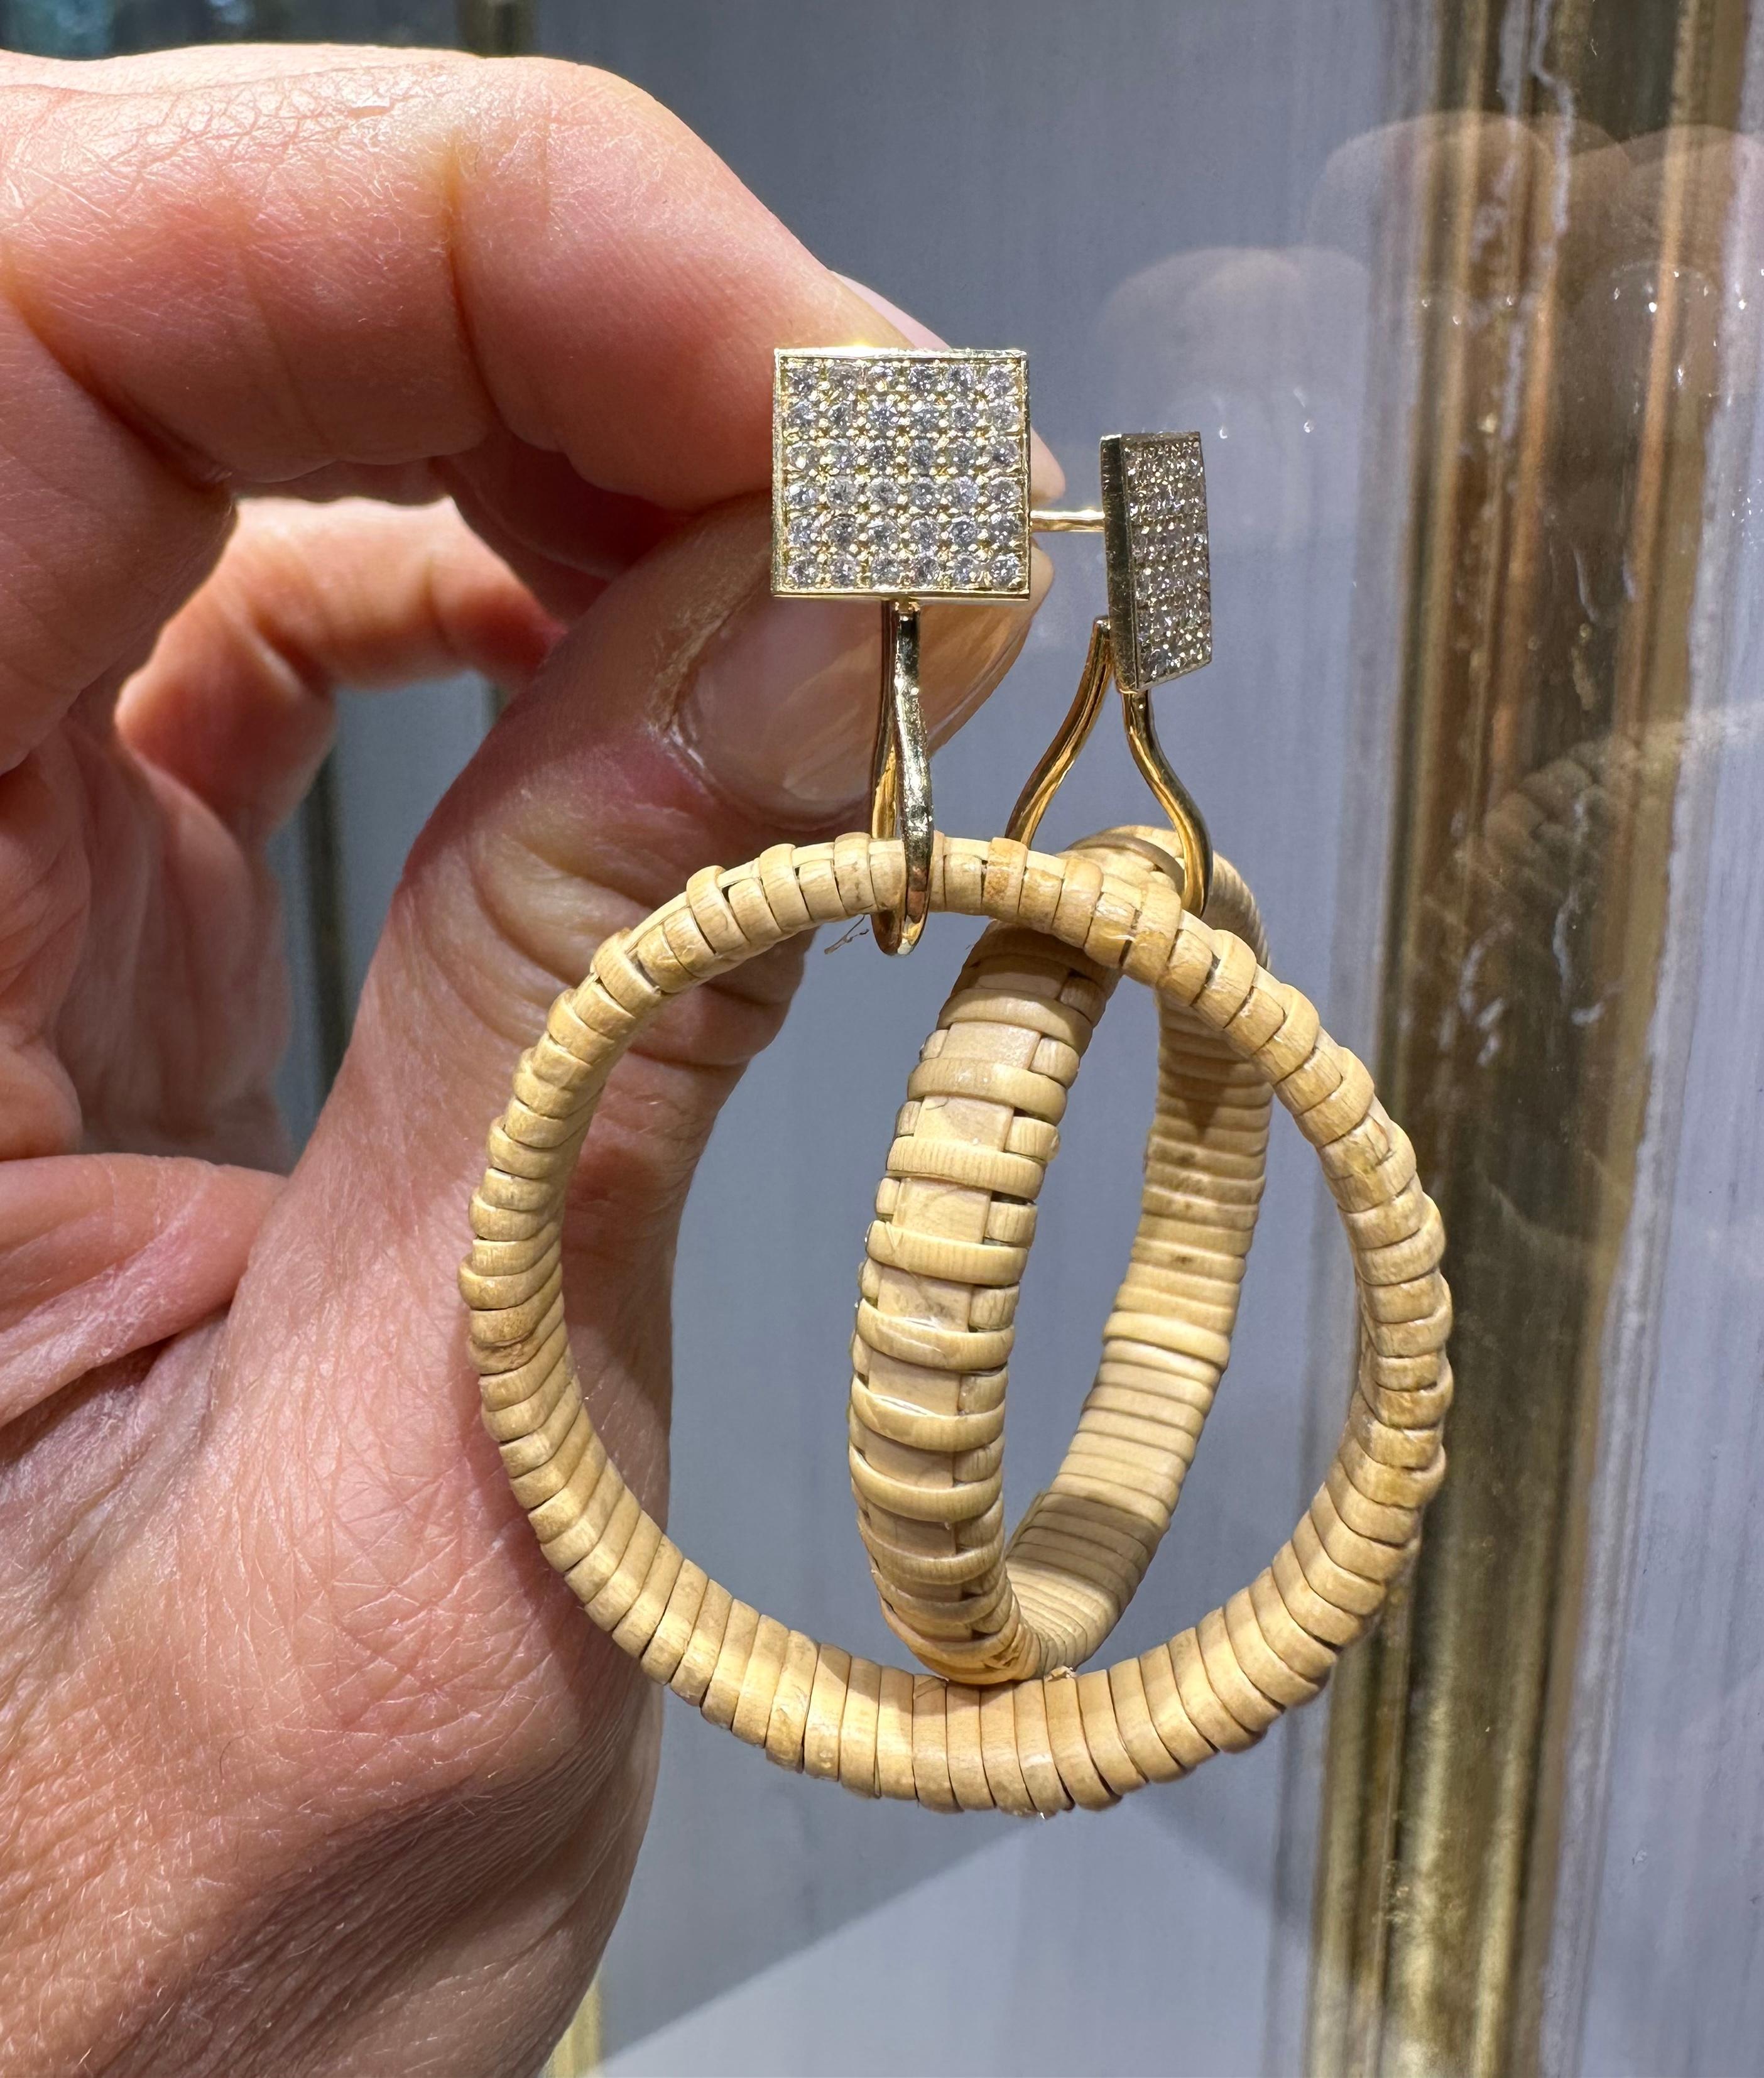 A new addition to the Hyannisport collection - Paris & Lily, handmade, 18K gold, SI1 pave diamond and natural Nantucket lightship basket hoop earrings.  The studs measure 10mm square and the hoops are 35mm in diameter.  